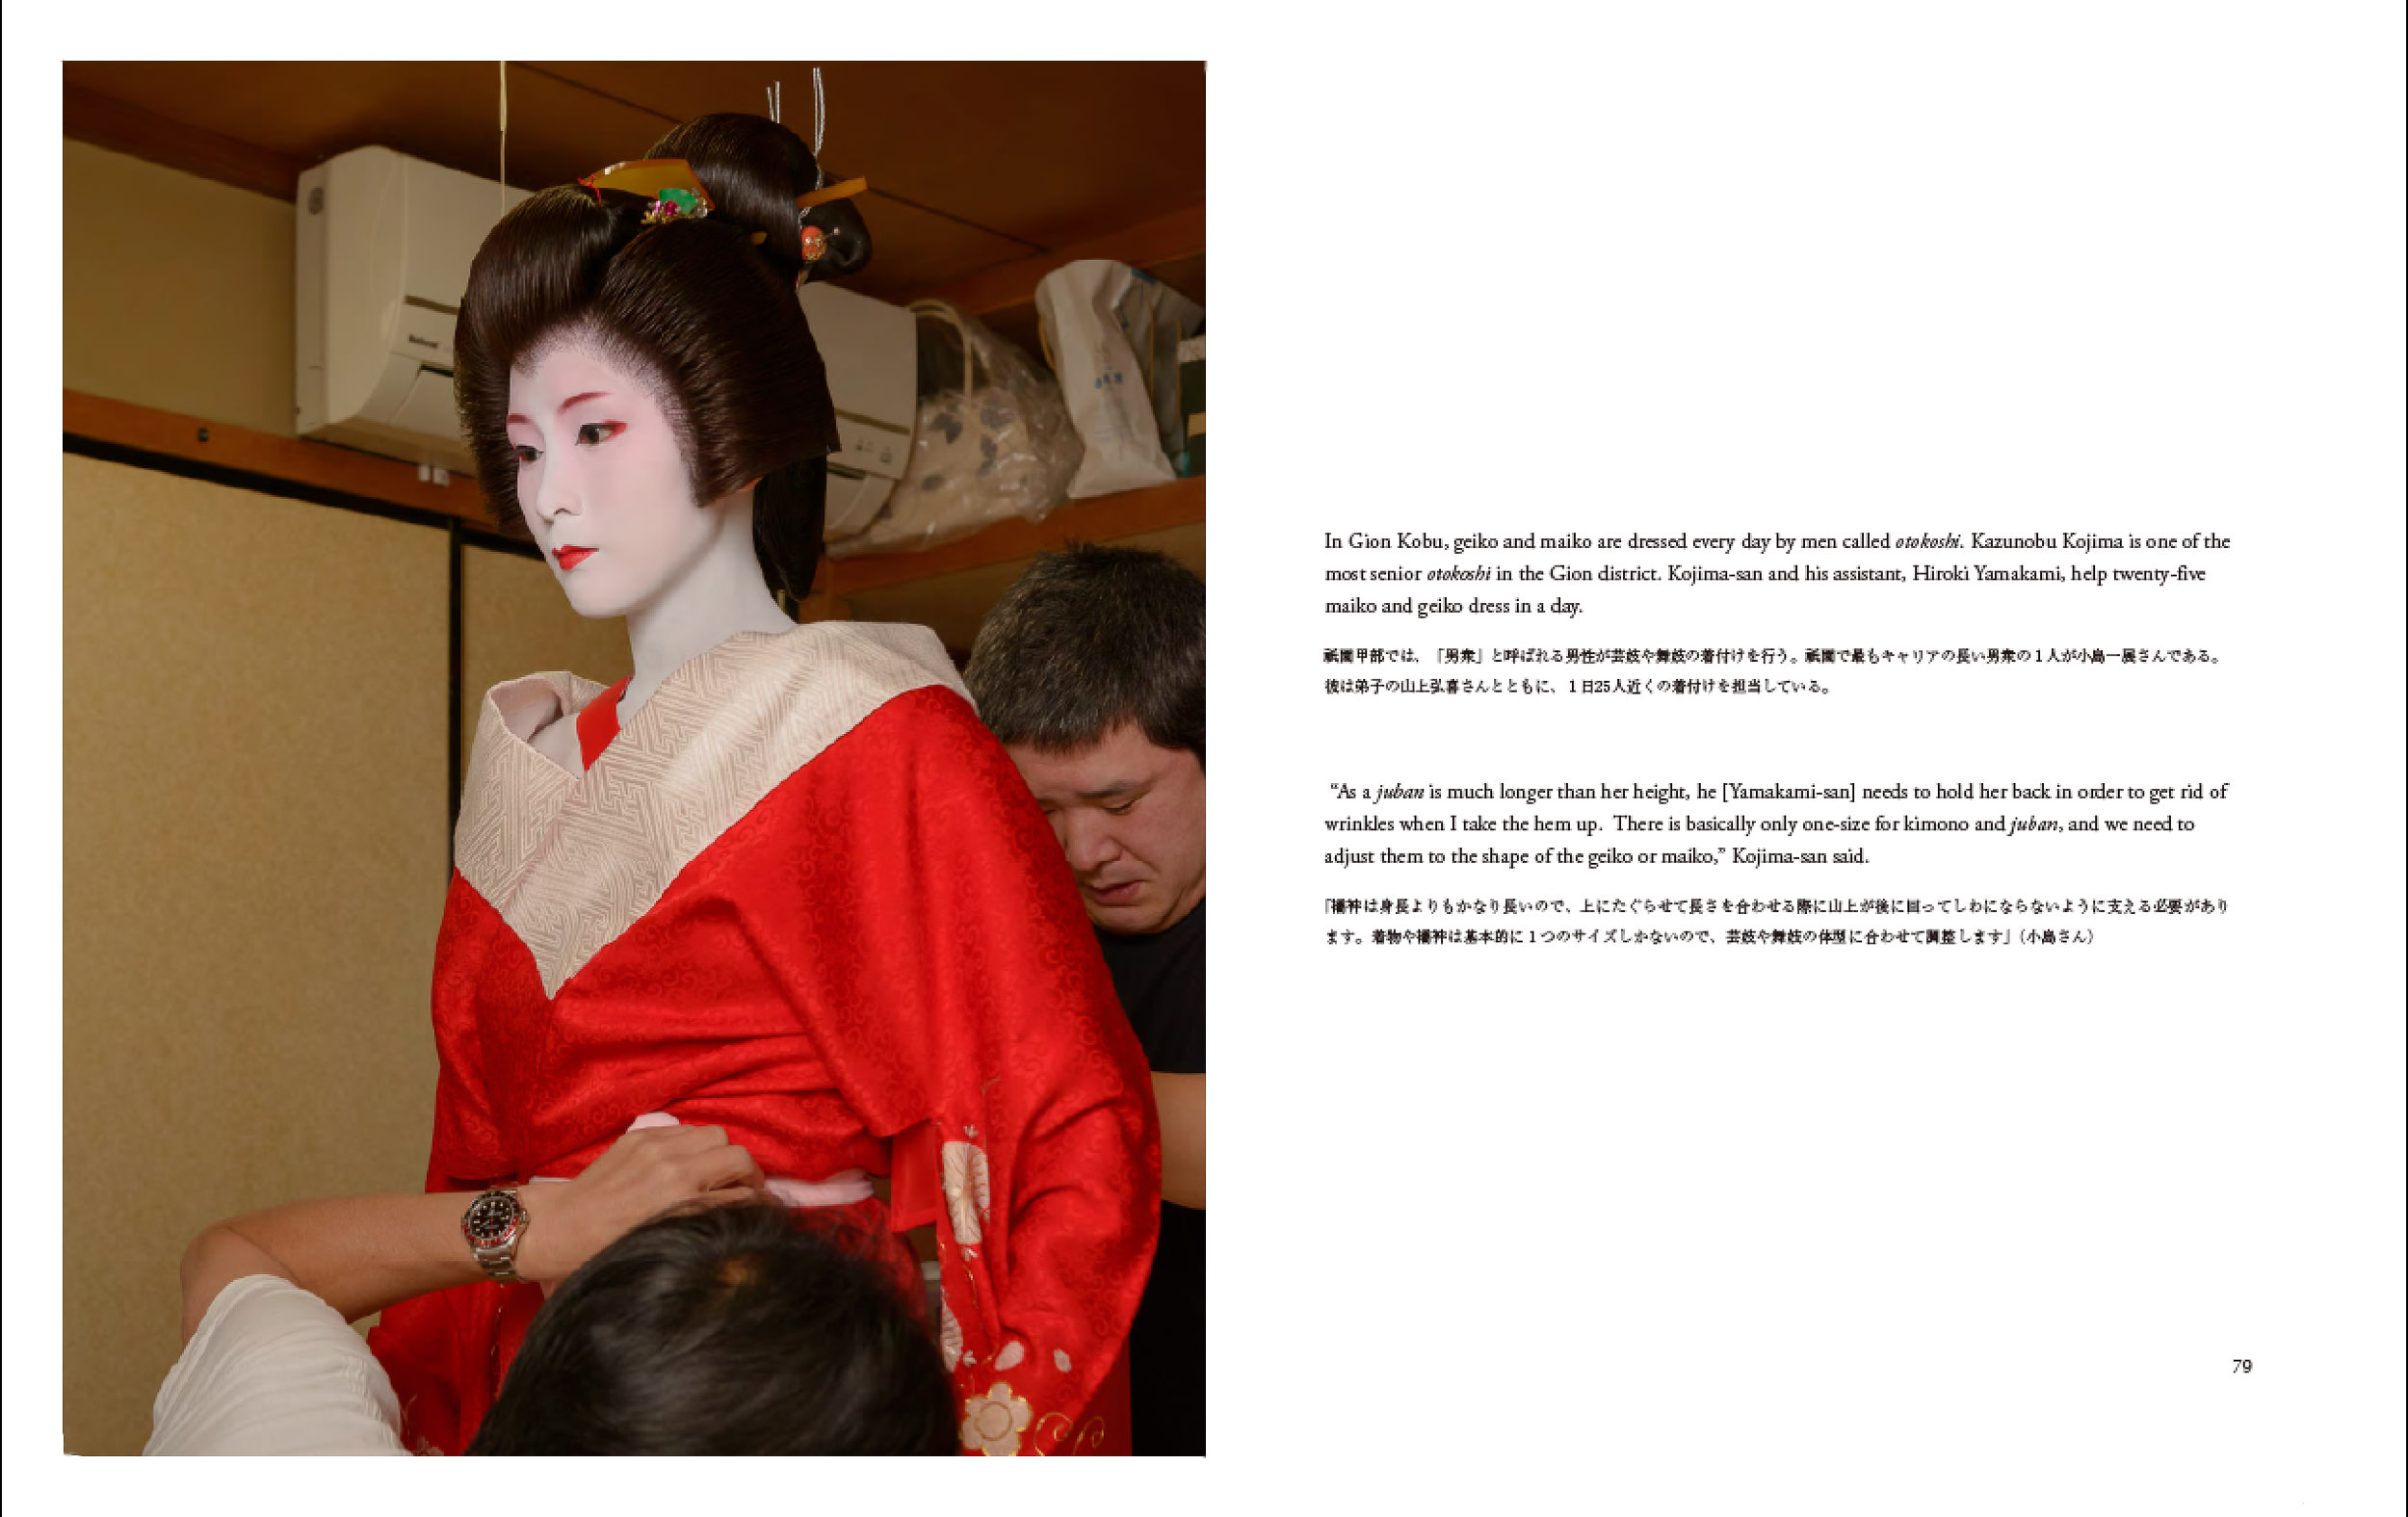 Now-a-Geisha-pages-78-9.jpg